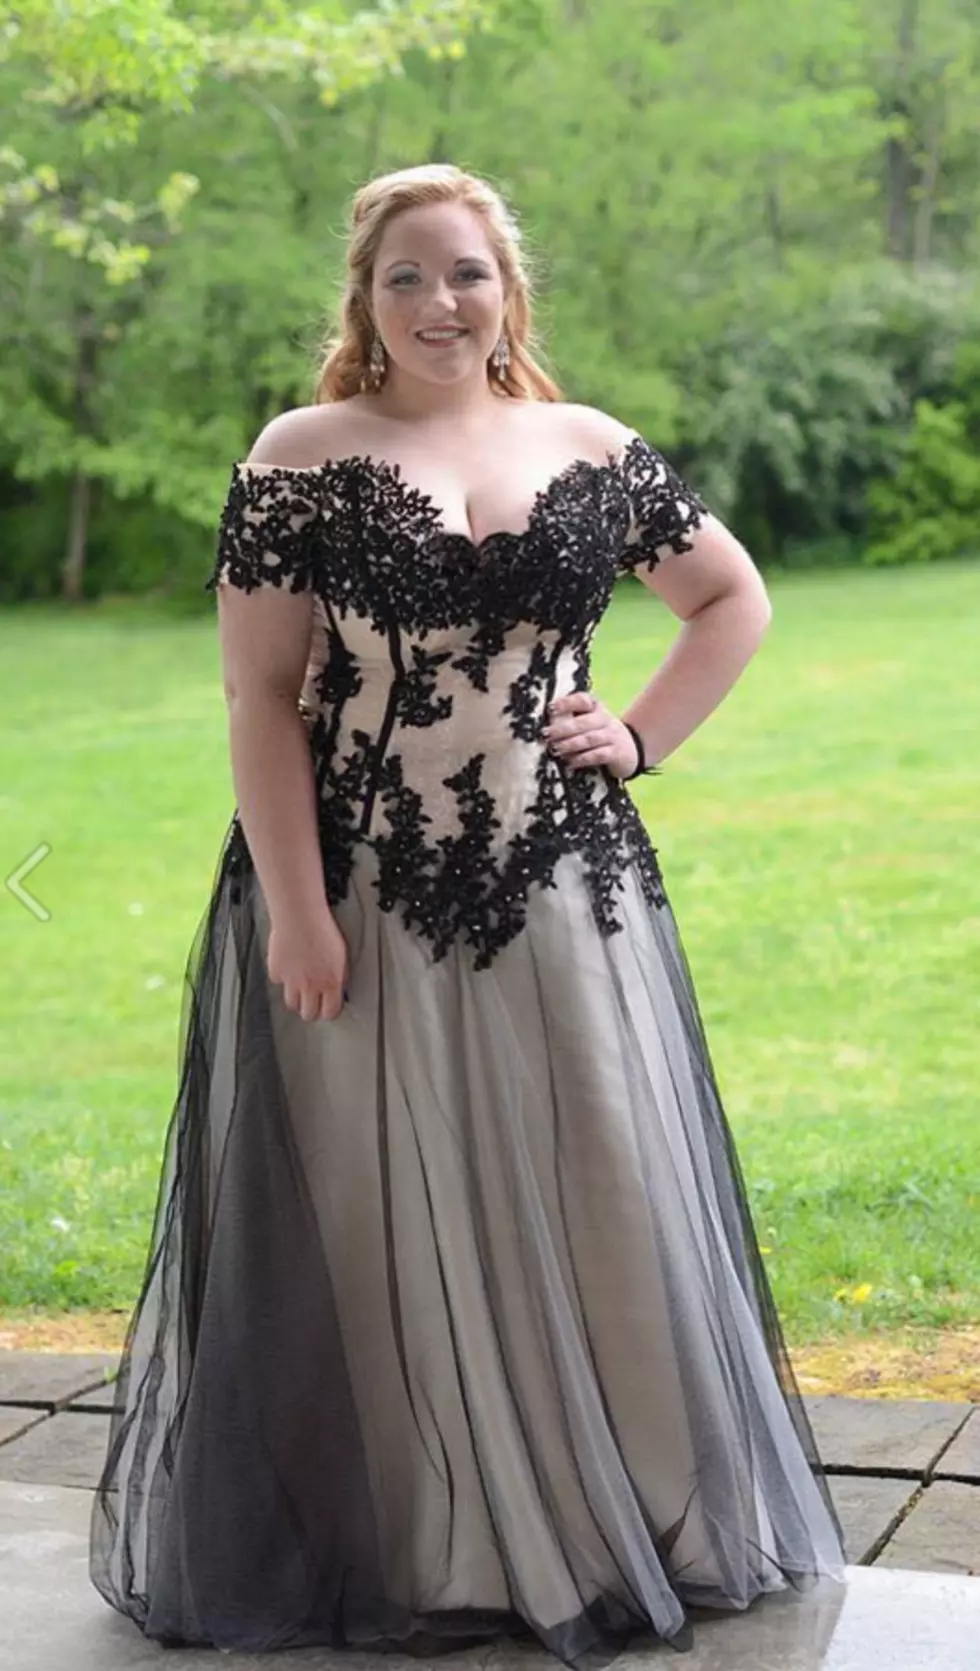 High School Girl&#8217;s Prom Pic Goes Viral After Being Called A &#8216;Big Girl&#8217; And Was Made To &#8216;Cover Up&#8217; [PIC]